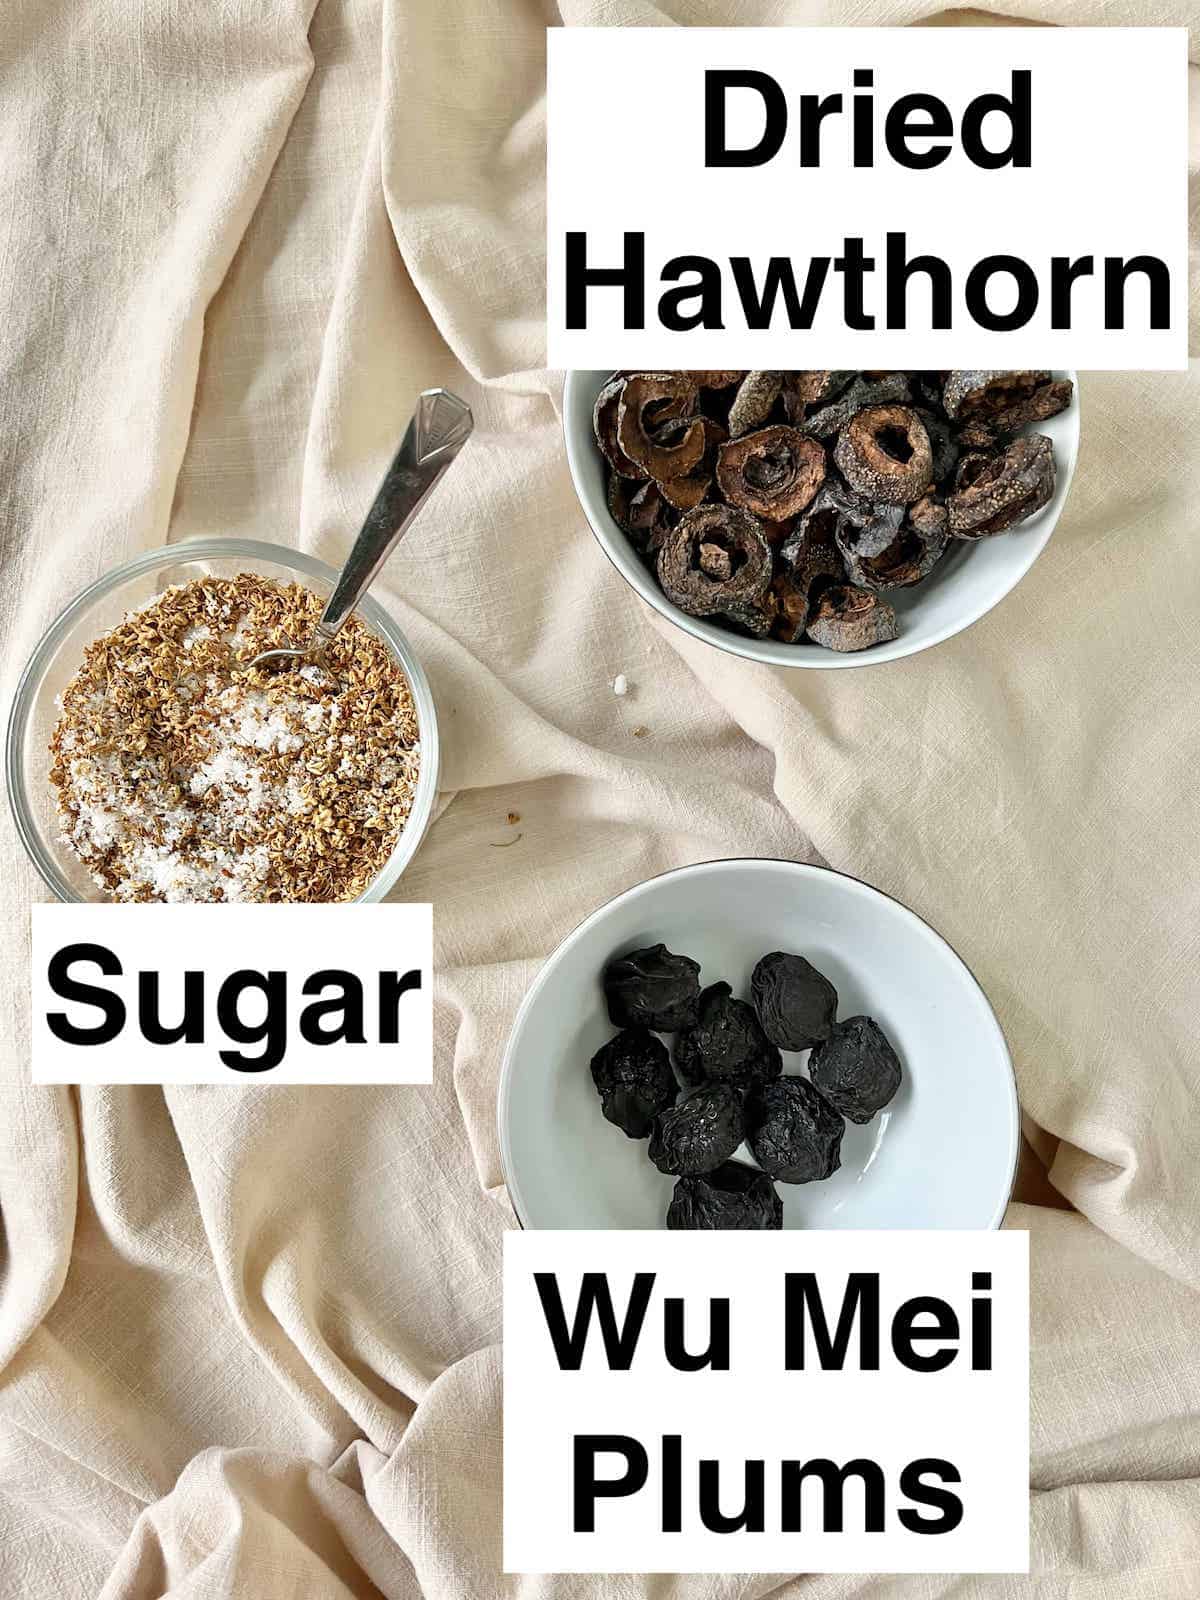 Osmanthus sugar, wu Mei preserved Chinese plums and dried hawthorn slices in bowls.